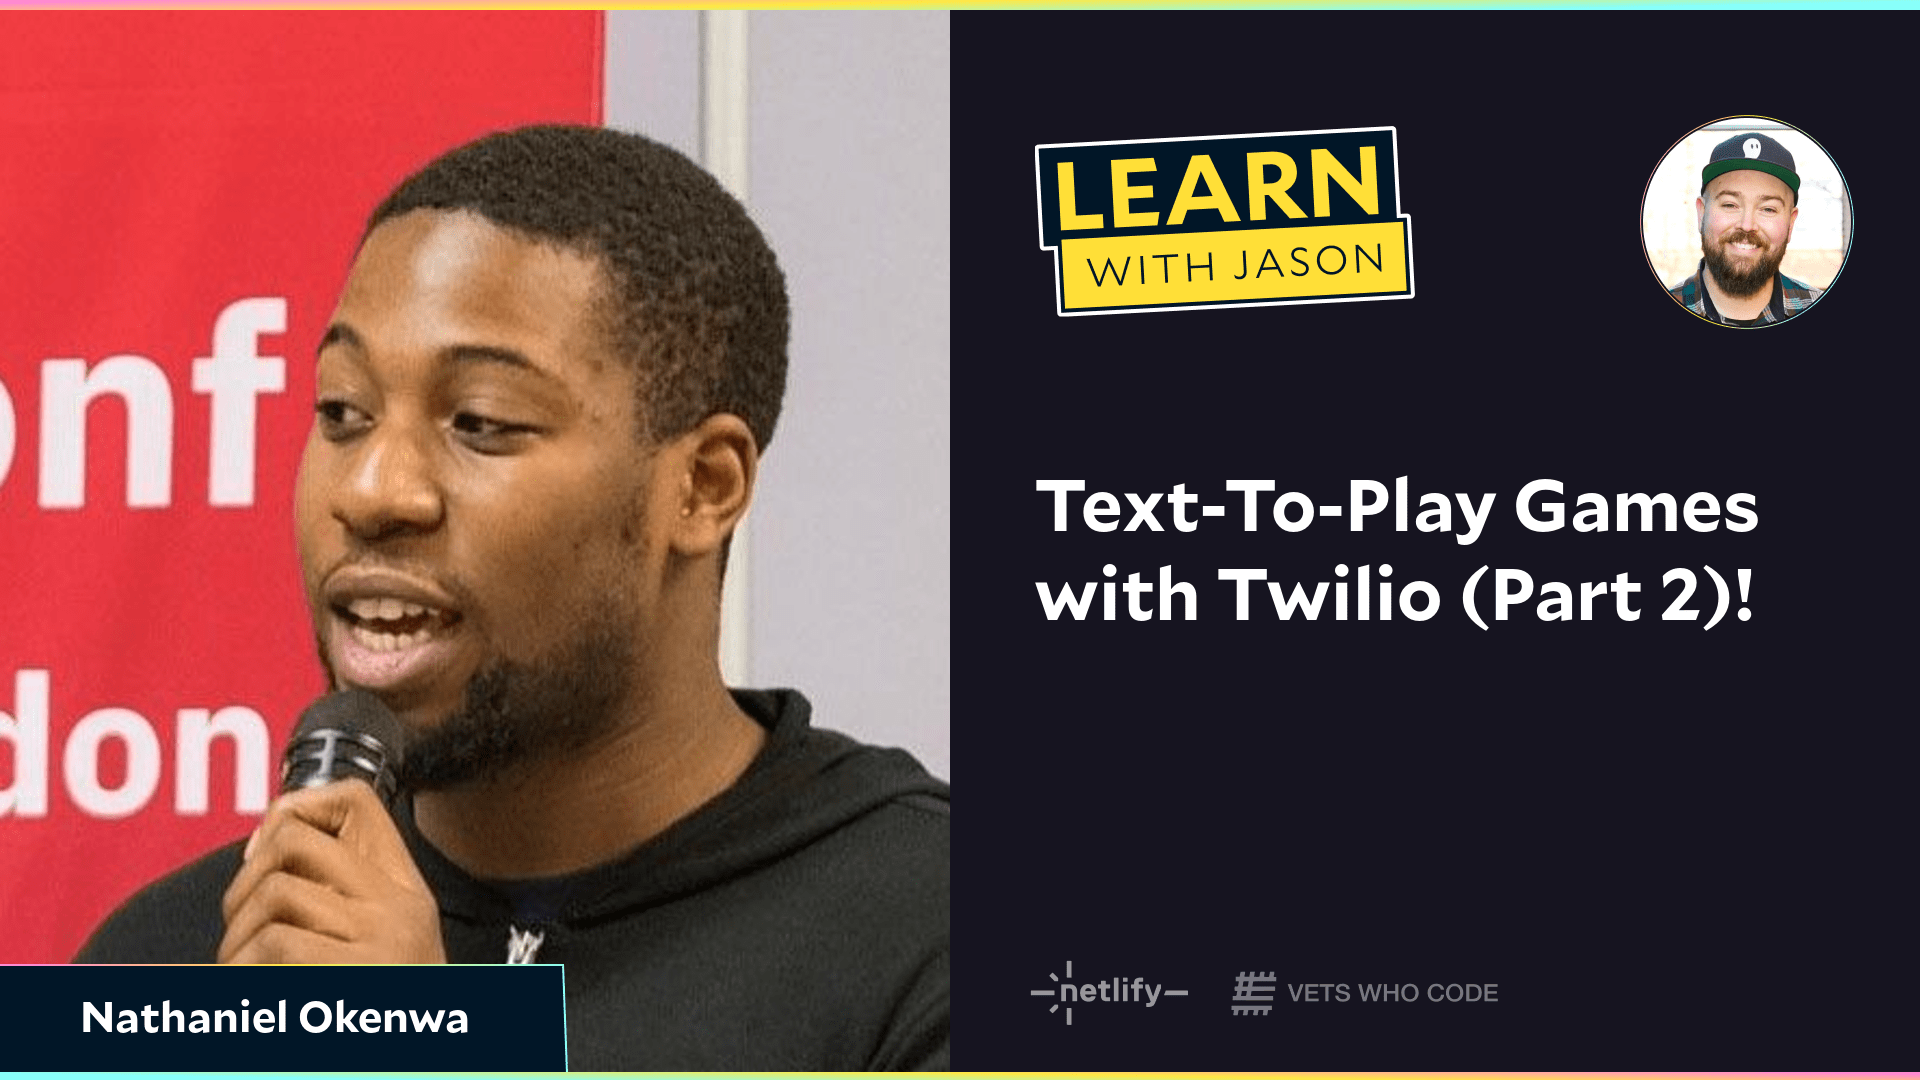 Text-To-Play Games with Twilio (Part 2)! (with Nathaniel Okenwa)